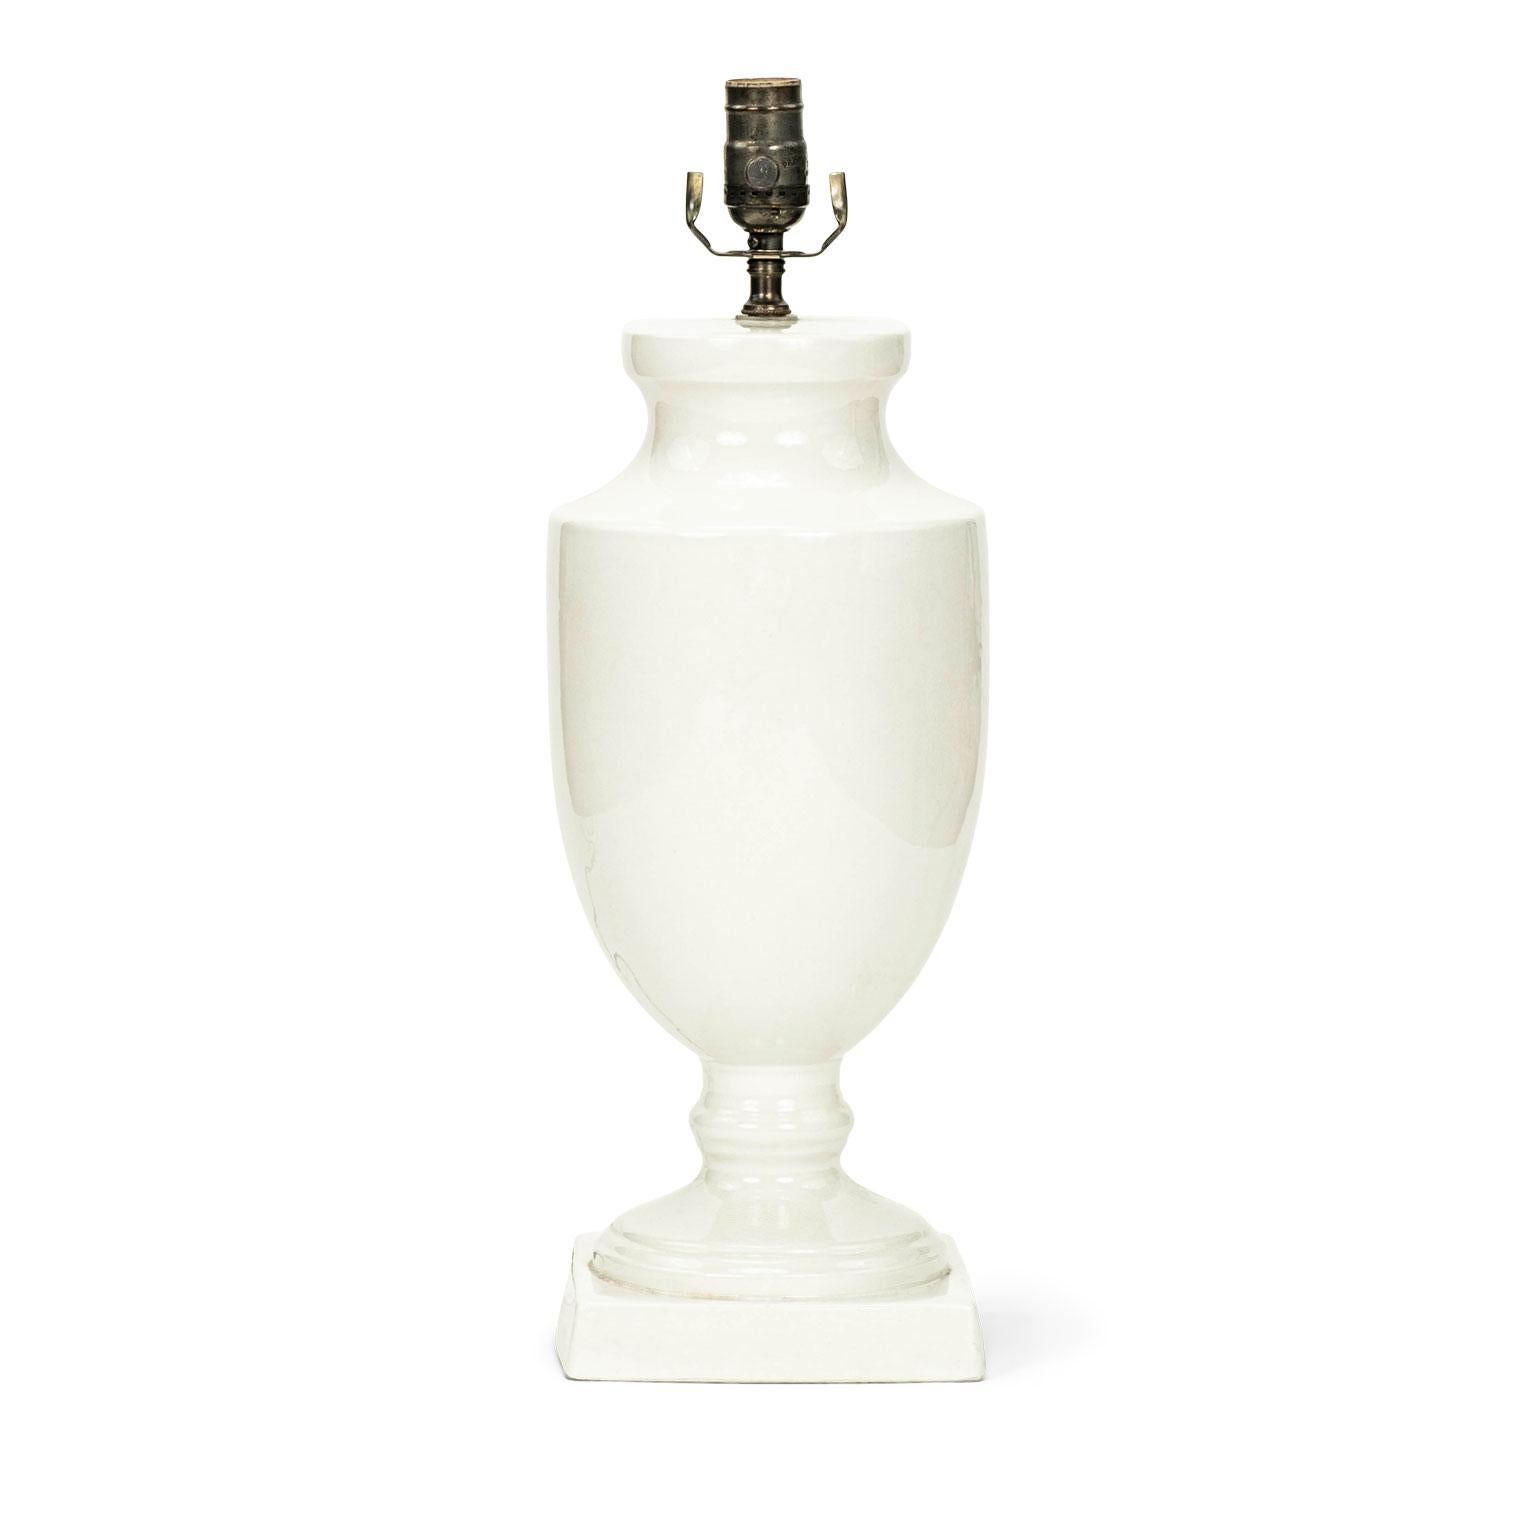 Vintage French white ceramic table lamp. Urn-shape lamp newly wired for use within the USA. Sold without shade (listed height measures from base to top of socket).